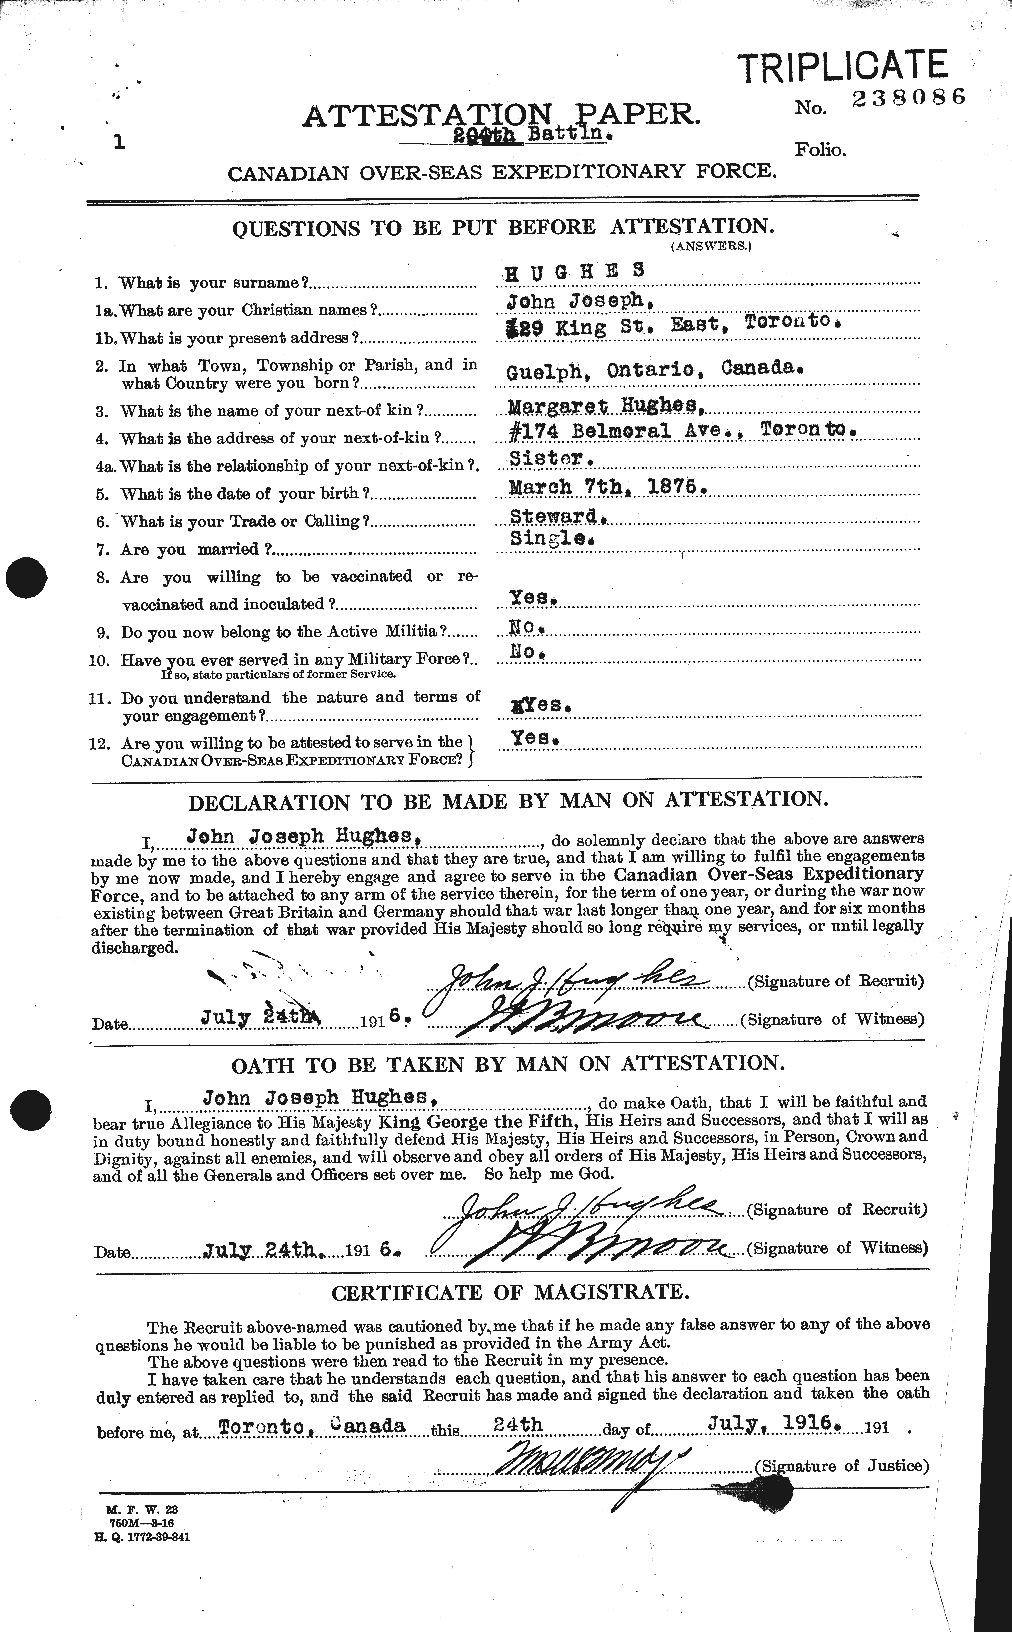 Personnel Records of the First World War - CEF 404037a